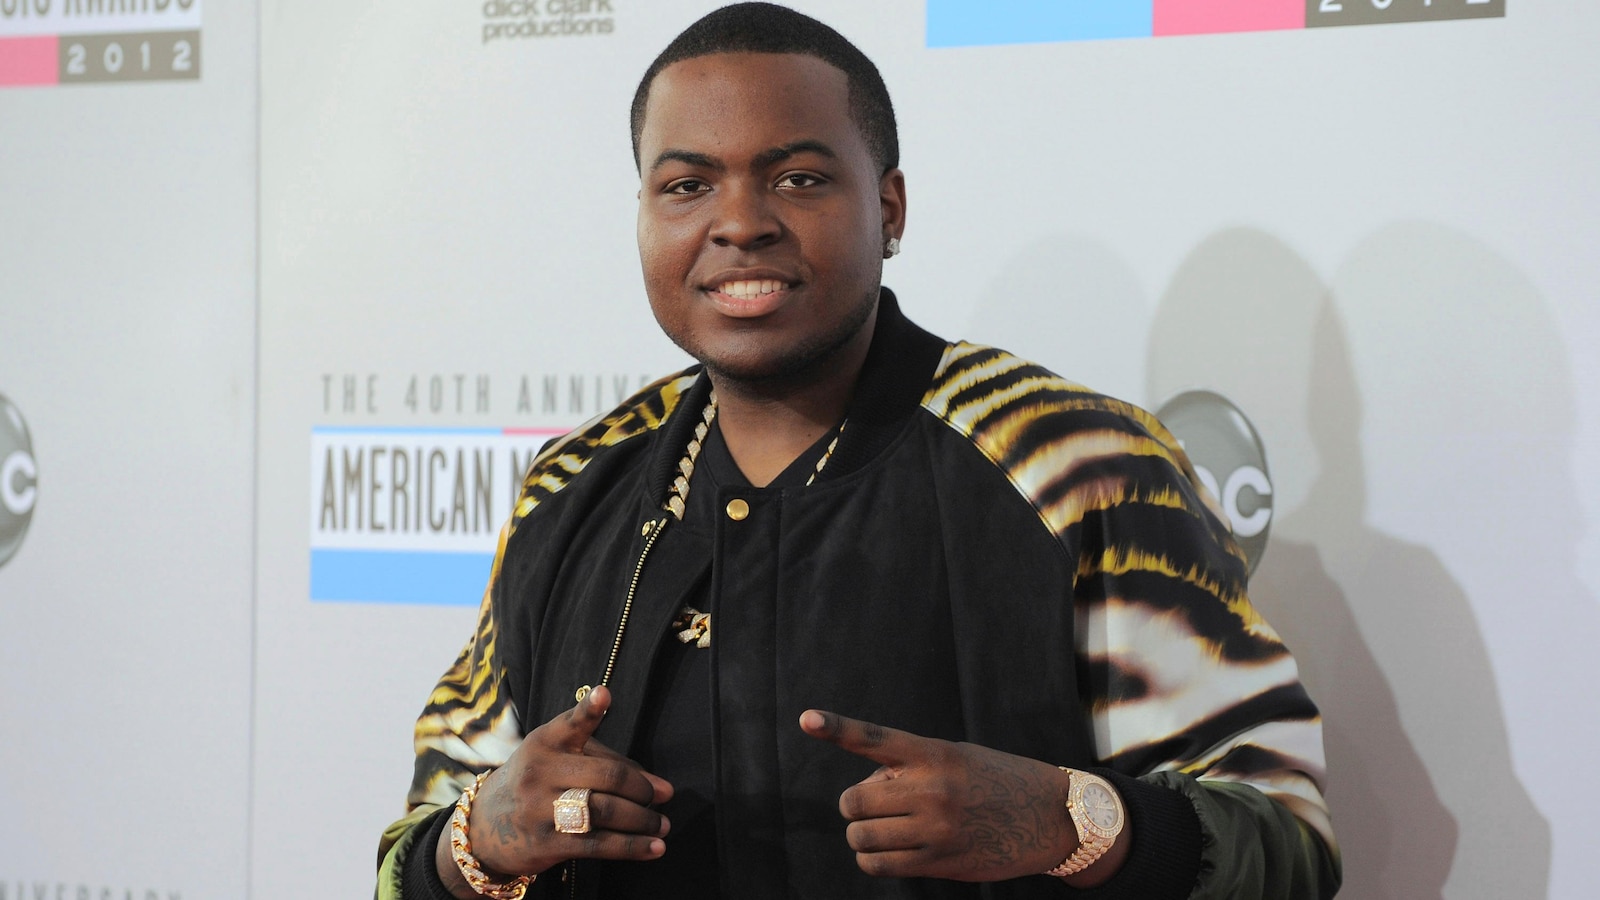 Rapper Sean Kingston and his mother indicted on federal charges in $1M fraud scheme